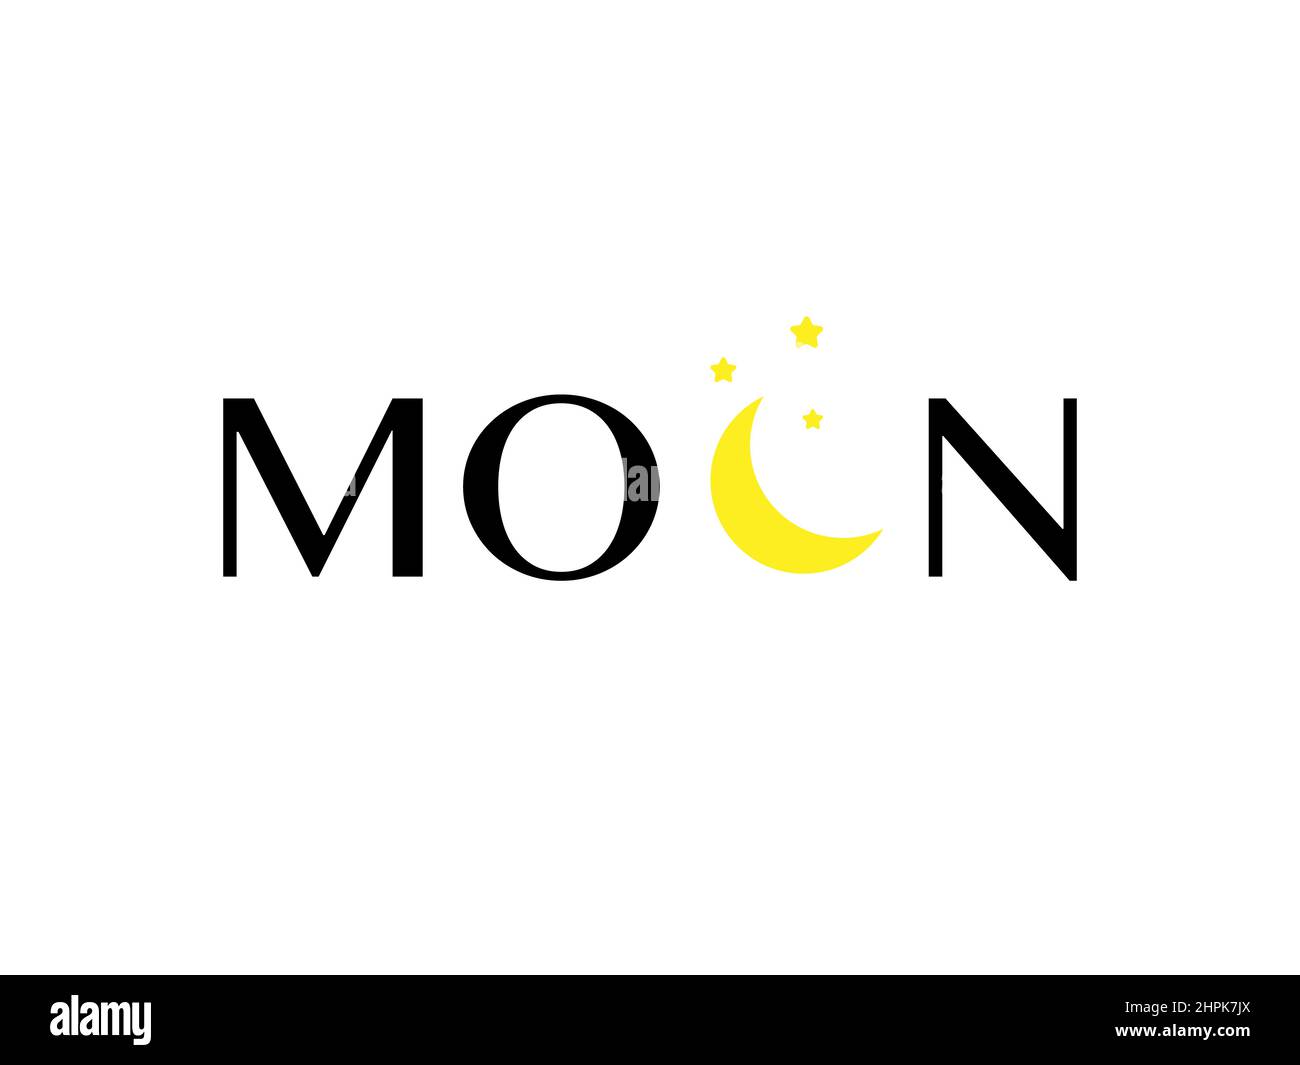 Moon stars font word icon illustration. Crescent moons logo sign vector business card background. Hand written yellow black alphabet element design Stock Vector